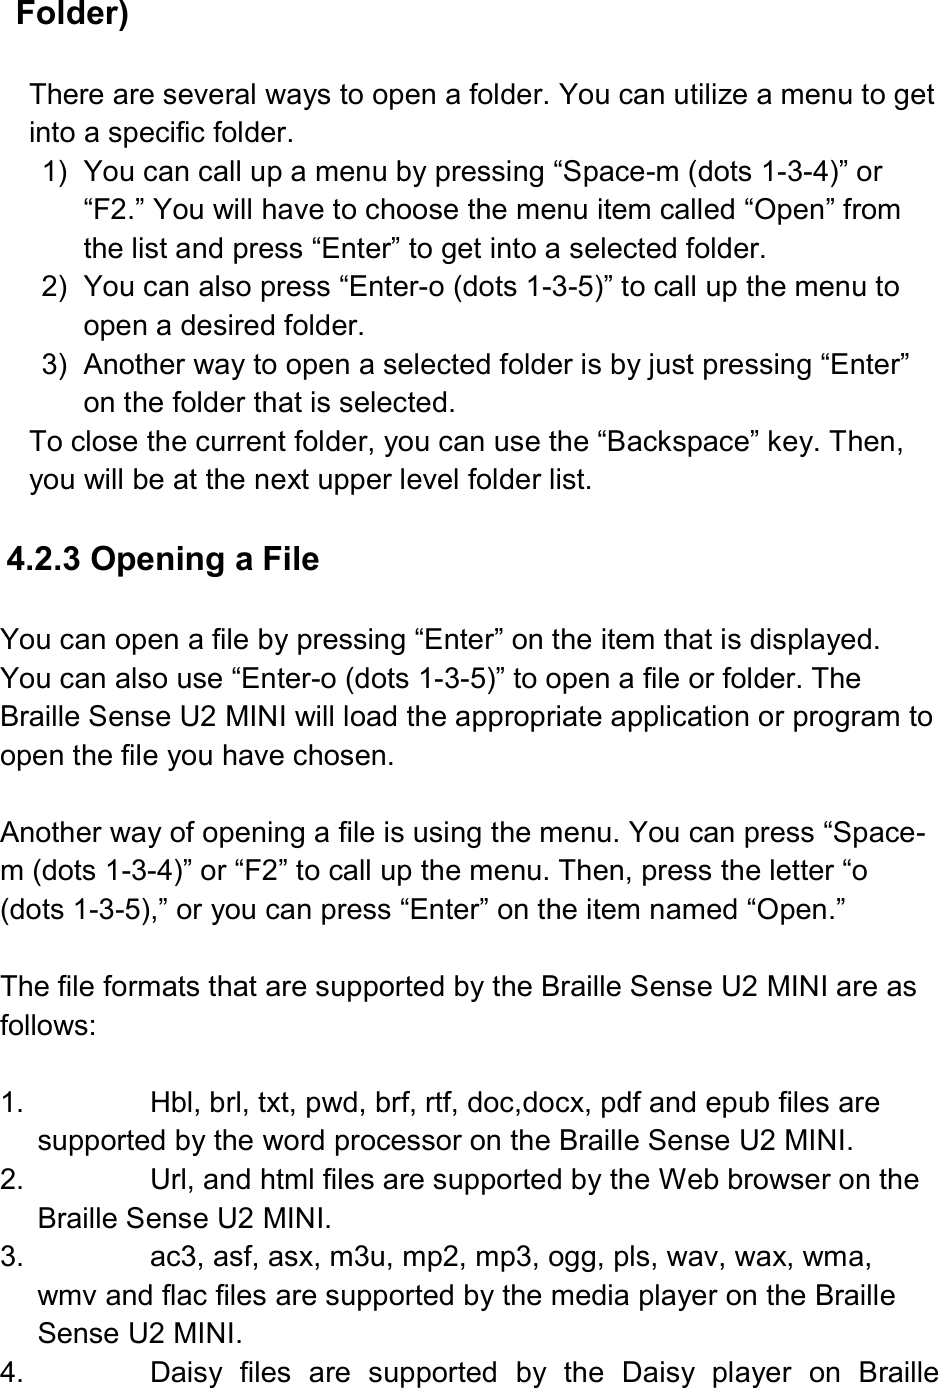  Folder)  There are several ways to open a folder. You can utilize a menu to get into a specific folder. 1)  You can call up a menu by pressing “Space-m (dots 1-3-4)” or “F2.” You will have to choose the menu item called “Open” from the list and press “Enter” to get into a selected folder. 2)  You can also press “Enter-o (dots 1-3-5)” to call up the menu to open a desired folder. 3)  Another way to open a selected folder is by just pressing “Enter” on the folder that is selected. To close the current folder, you can use the “Backspace” key. Then, you will be at the next upper level folder list.  4.2.3 Opening a File  You can open a file by pressing “Enter” on the item that is displayed. You can also use “Enter-o (dots 1-3-5)” to open a file or folder. The Braille Sense U2 MINI will load the appropriate application or program to open the file you have chosen.  Another way of opening a file is using the menu. You can press “Space-m (dots 1-3-4)” or “F2” to call up the menu. Then, press the letter “o (dots 1-3-5),” or you can press “Enter” on the item named “Open.”  The file formats that are supported by the Braille Sense U2 MINI are as follows:  1.  Hbl, brl, txt, pwd, brf, rtf, doc,docx, pdf and epub files are supported by the word processor on the Braille Sense U2 MINI. 2.  Url, and html files are supported by the Web browser on the Braille Sense U2 MINI. 3.  ac3, asf, asx, m3u, mp2, mp3, ogg, pls, wav, wax, wma, wmv and flac files are supported by the media player on the Braille Sense U2 MINI. 4.  Daisy  files  are  supported  by  the  Daisy  player  on  Braille 